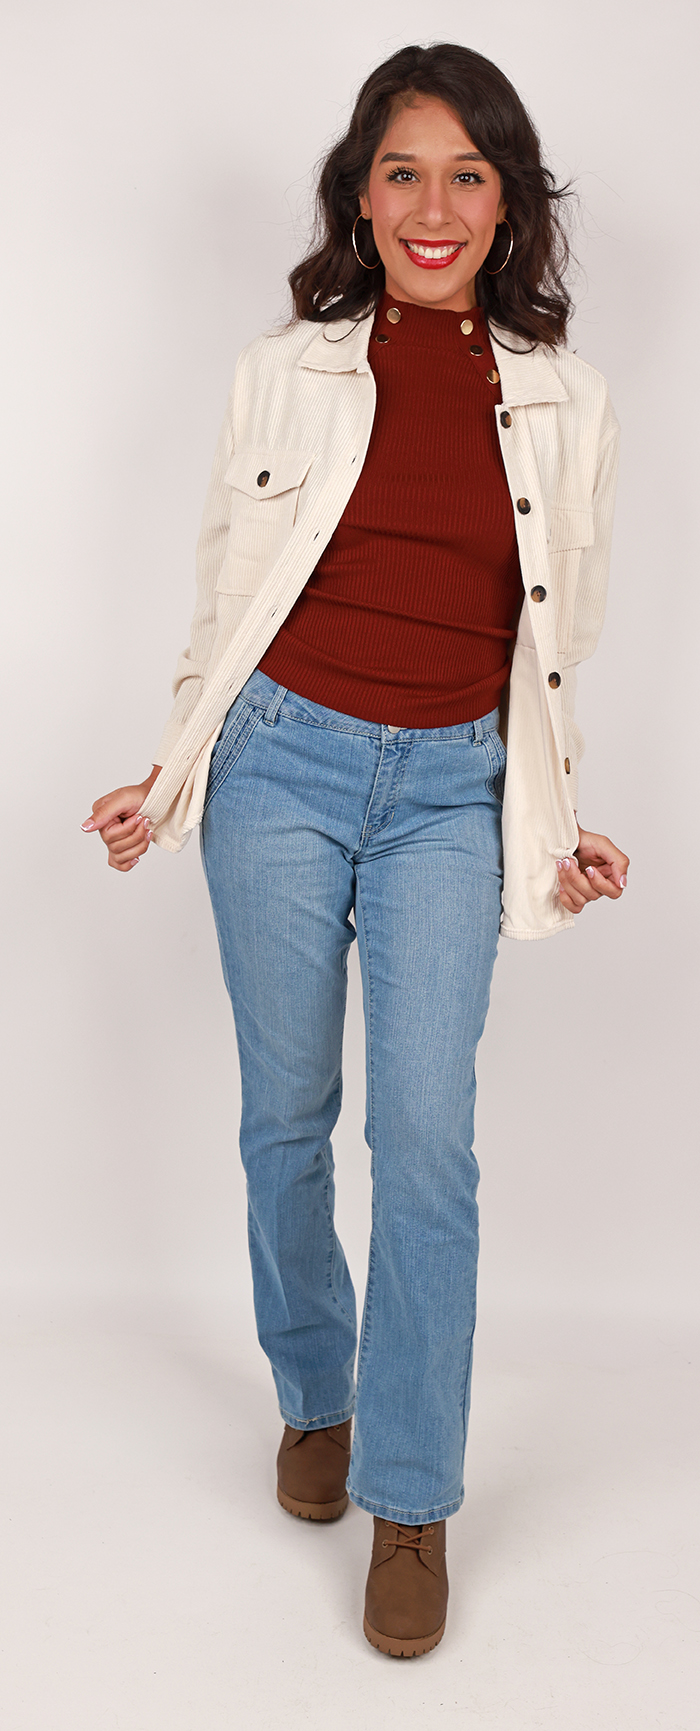 The female contempoary model wears the "No Comment" Long Sleeve Corduroy Button Down Shirt, "Full Circle" 23" Long Sleeve Gold Button Sweater, "DJEANS" Light Wash Straight Leg Denim Jeans and the "Soda" 2 1/2" Stack Lace-up Heeled Booties.